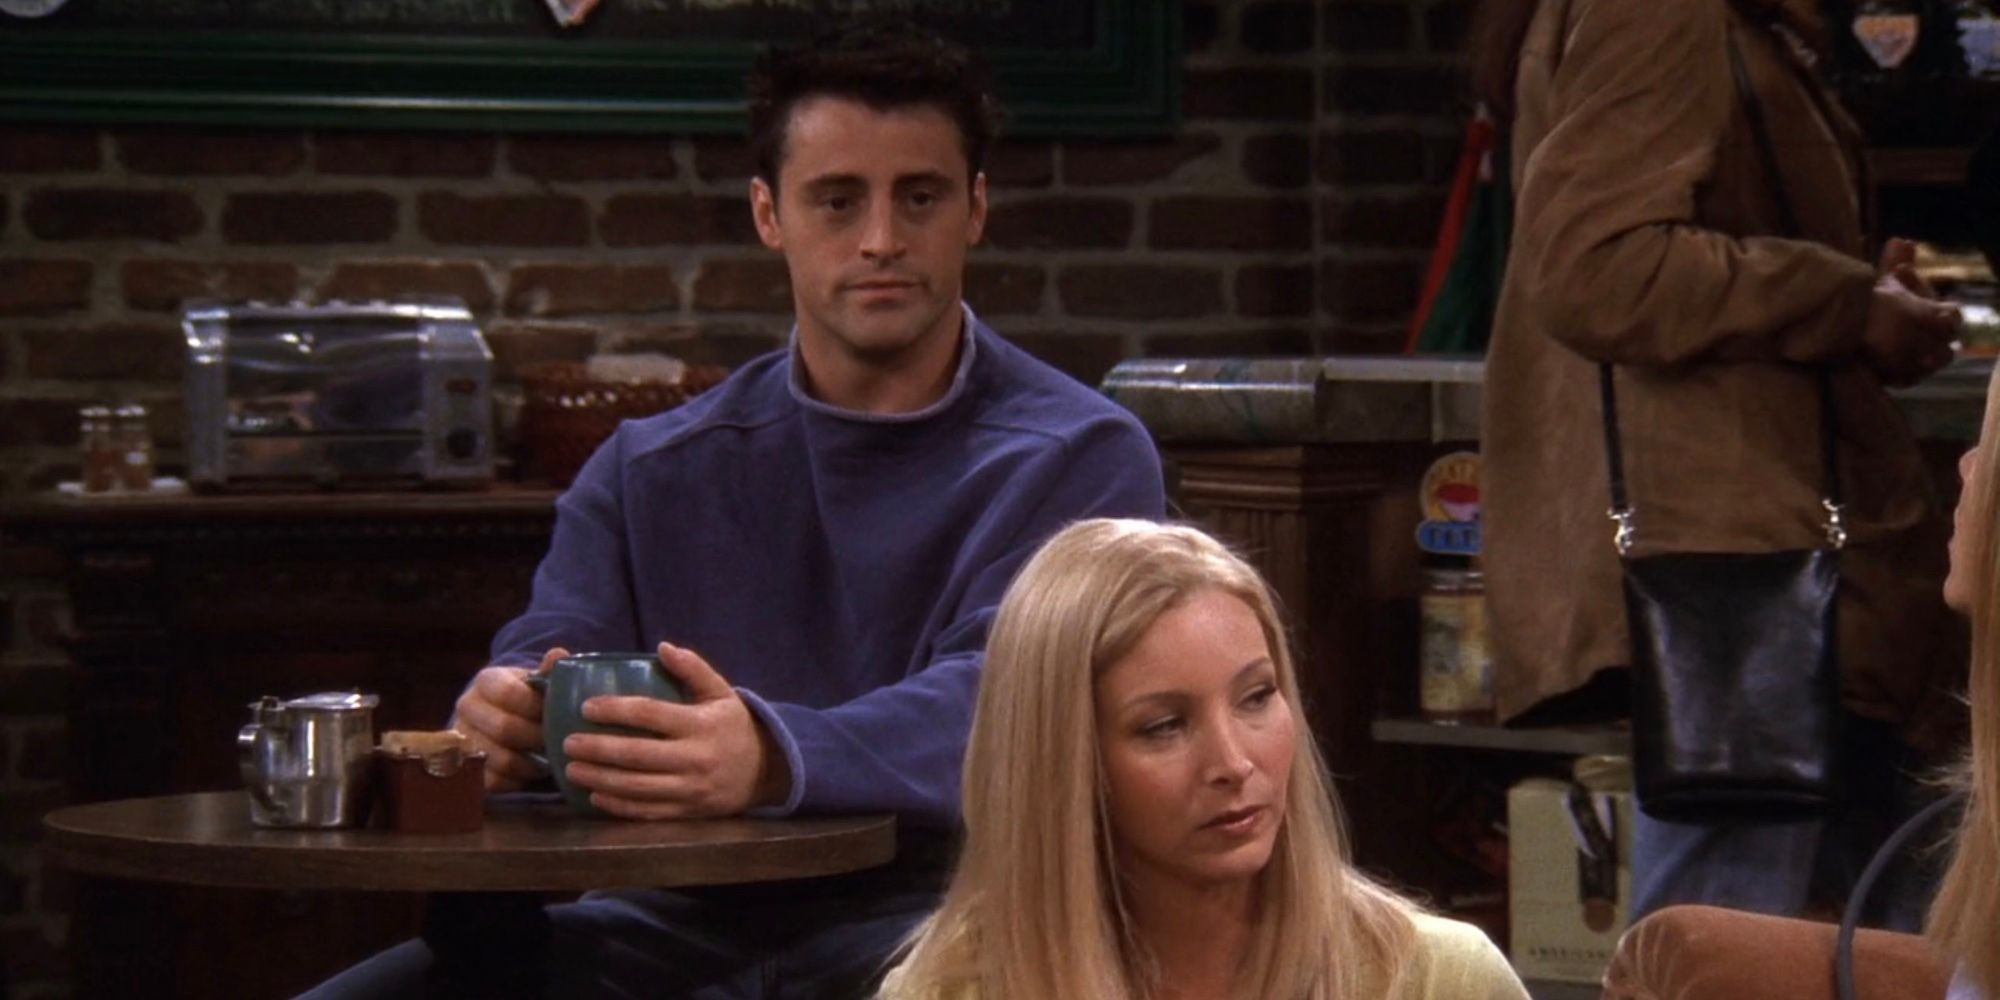 Phoebe (Lisa Kudrow) sits in front of Joey (Matt LeBlanc) while he clutches a coffee mug at Central Perk in Friends season 6, episode 8, 